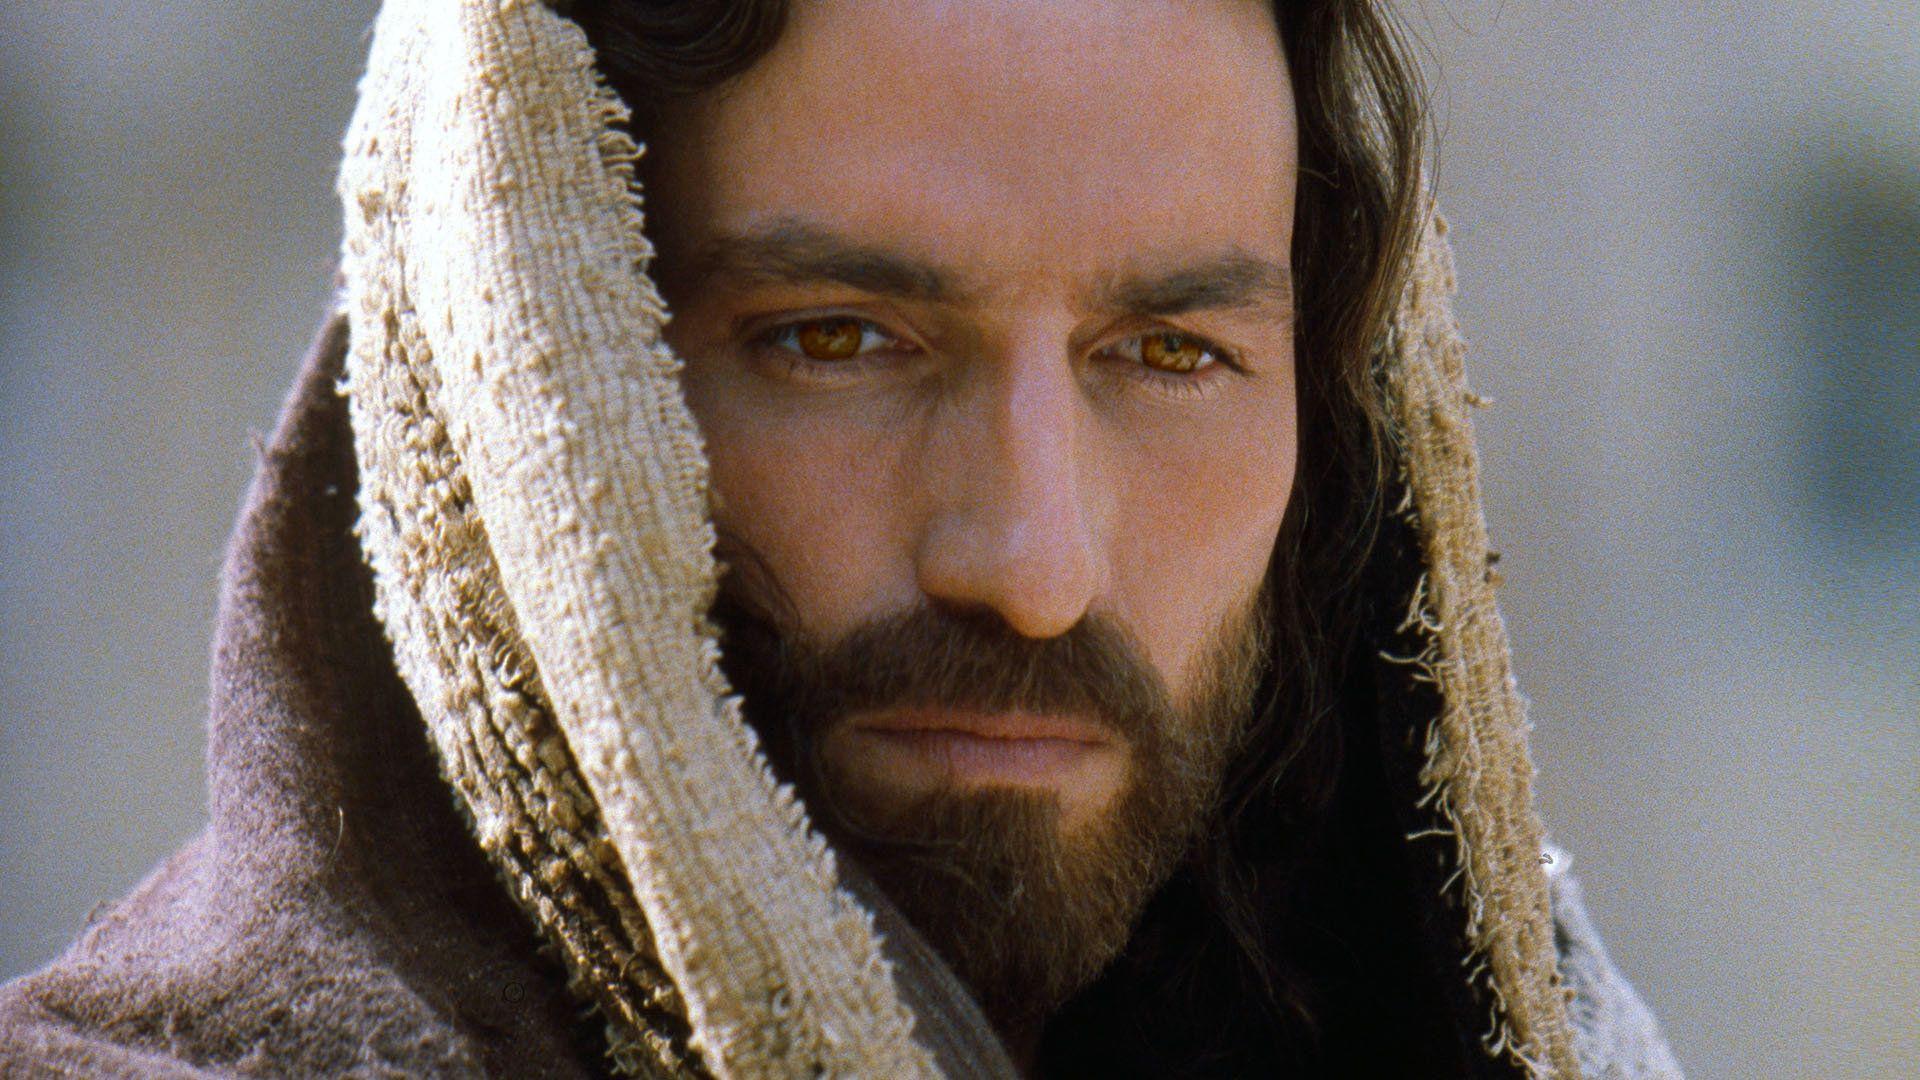 Would you see Mel Gibson's sequel to 'Passion of the Christ' about